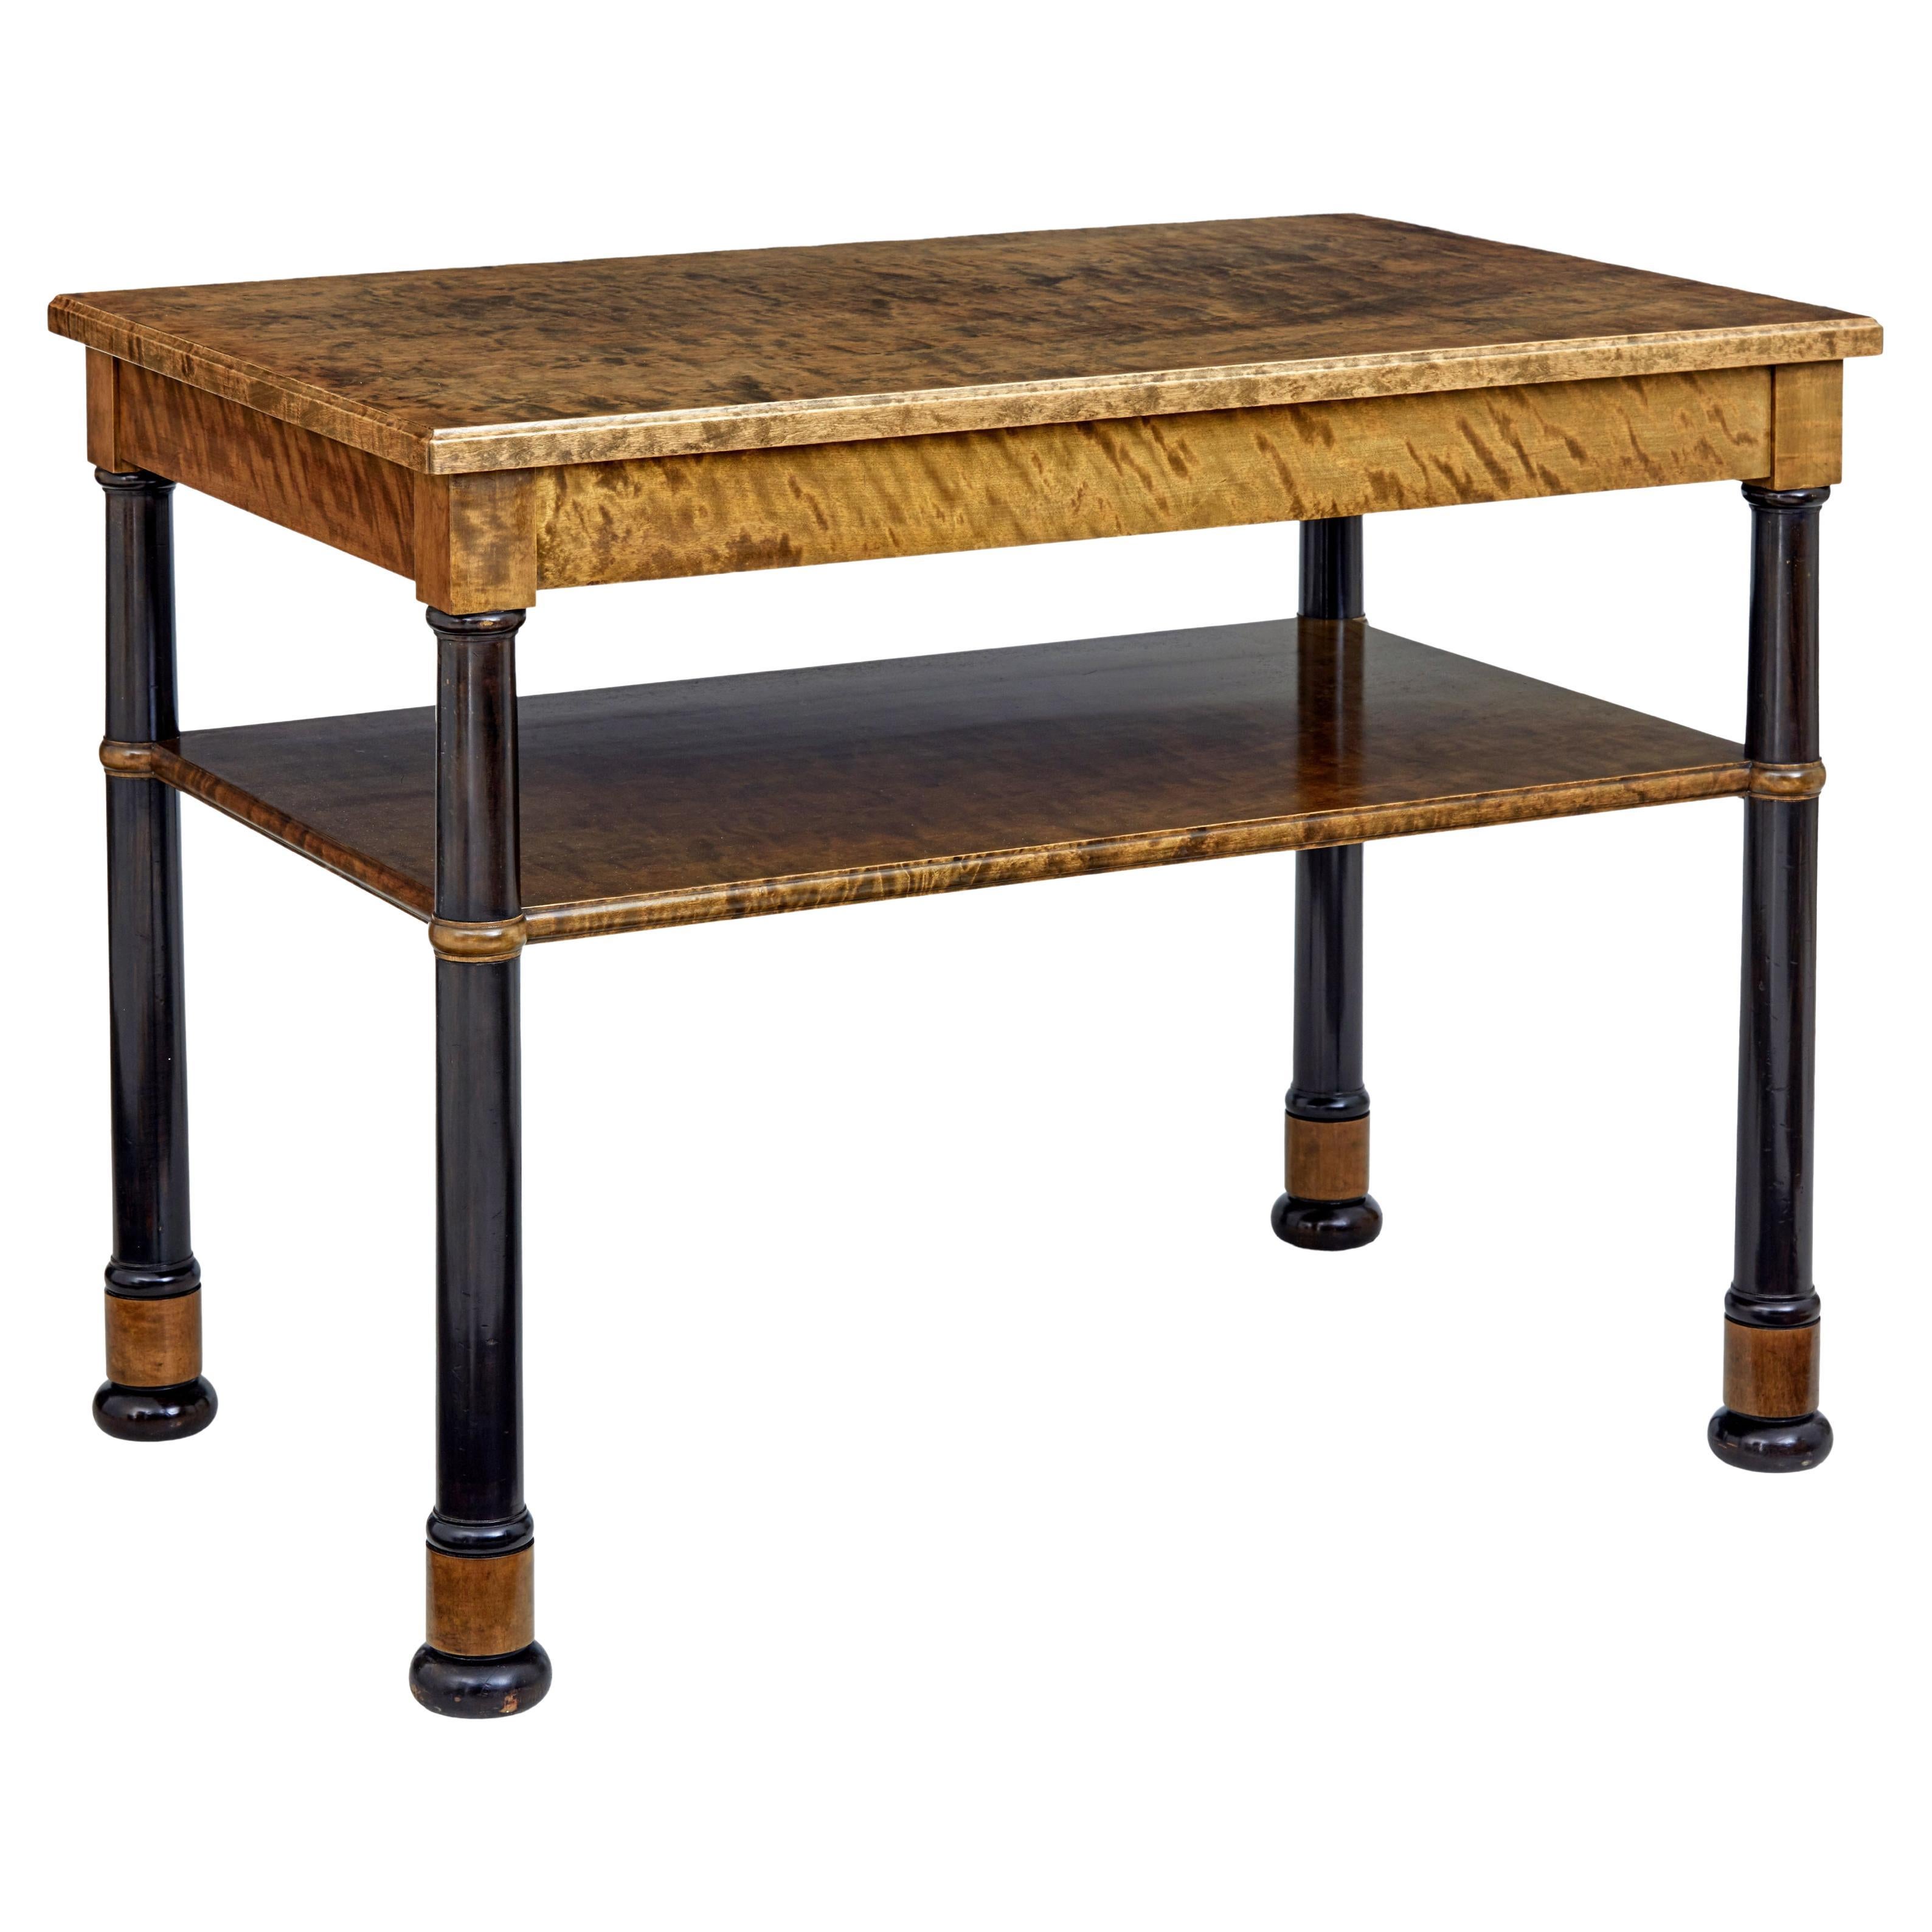 Early 20th century art deco birch serving table For Sale